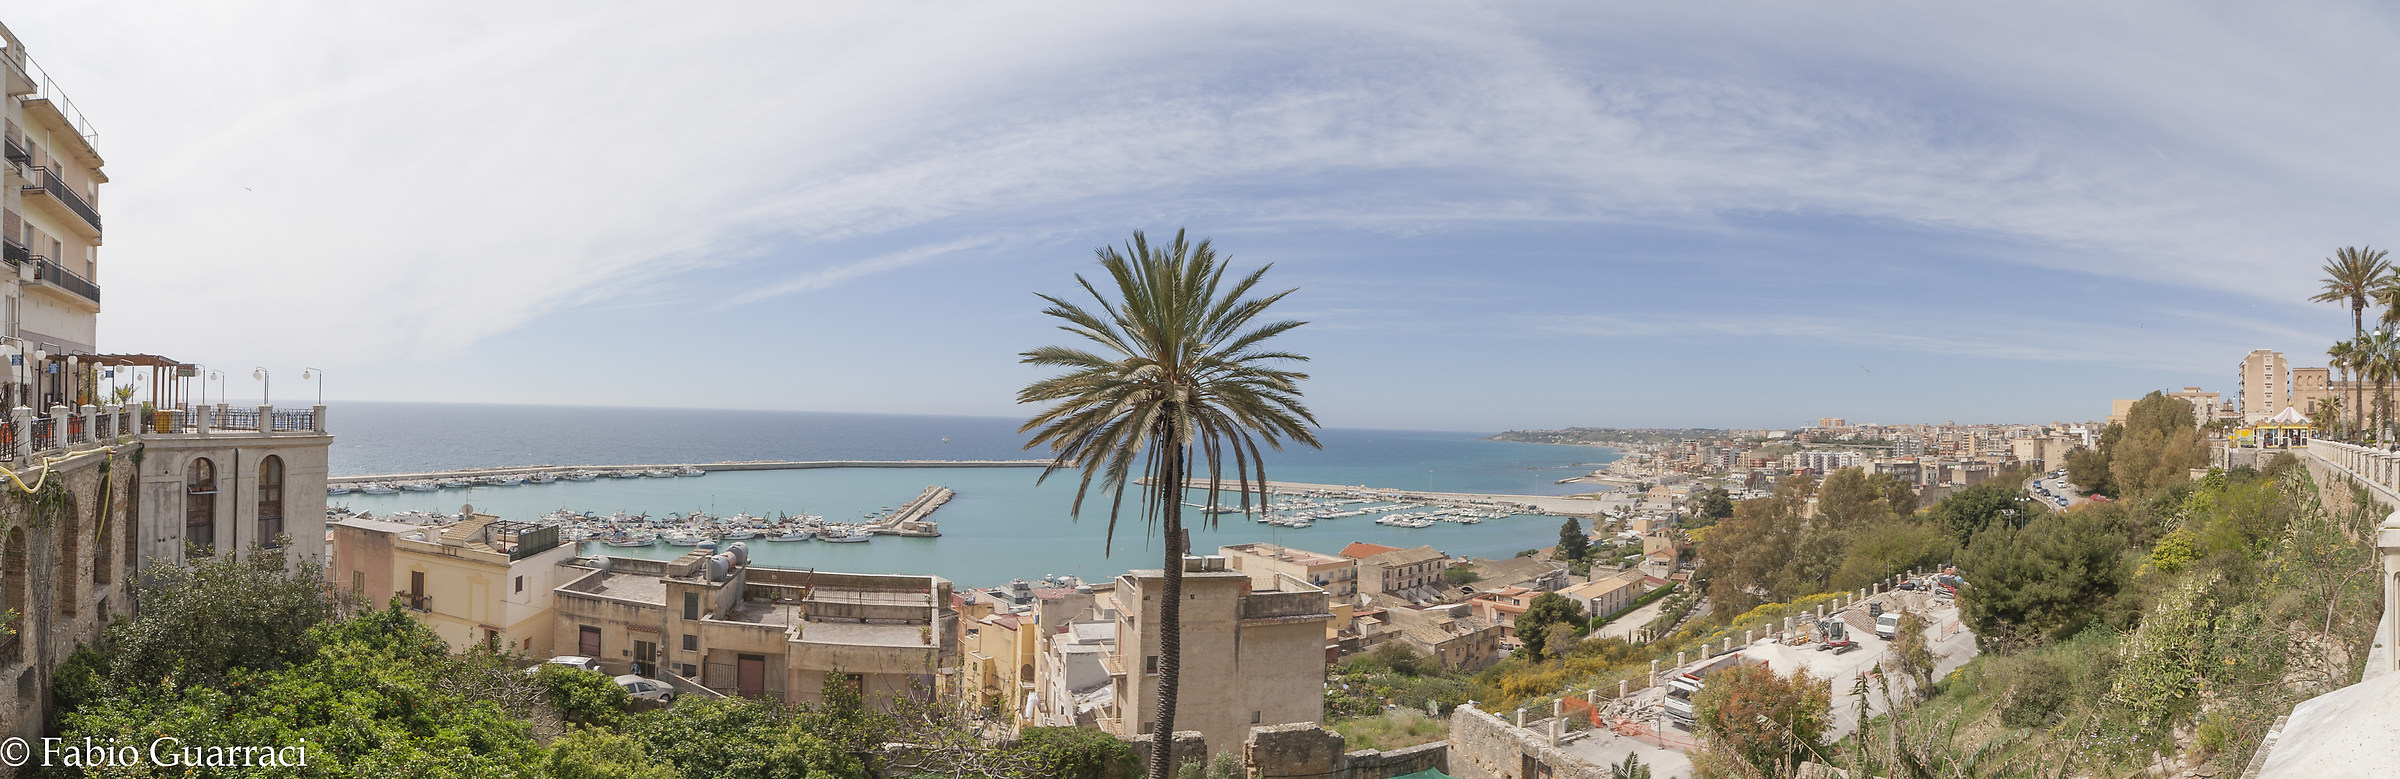 Sciacca, panorama from Piazza Angelo Scandaliato....